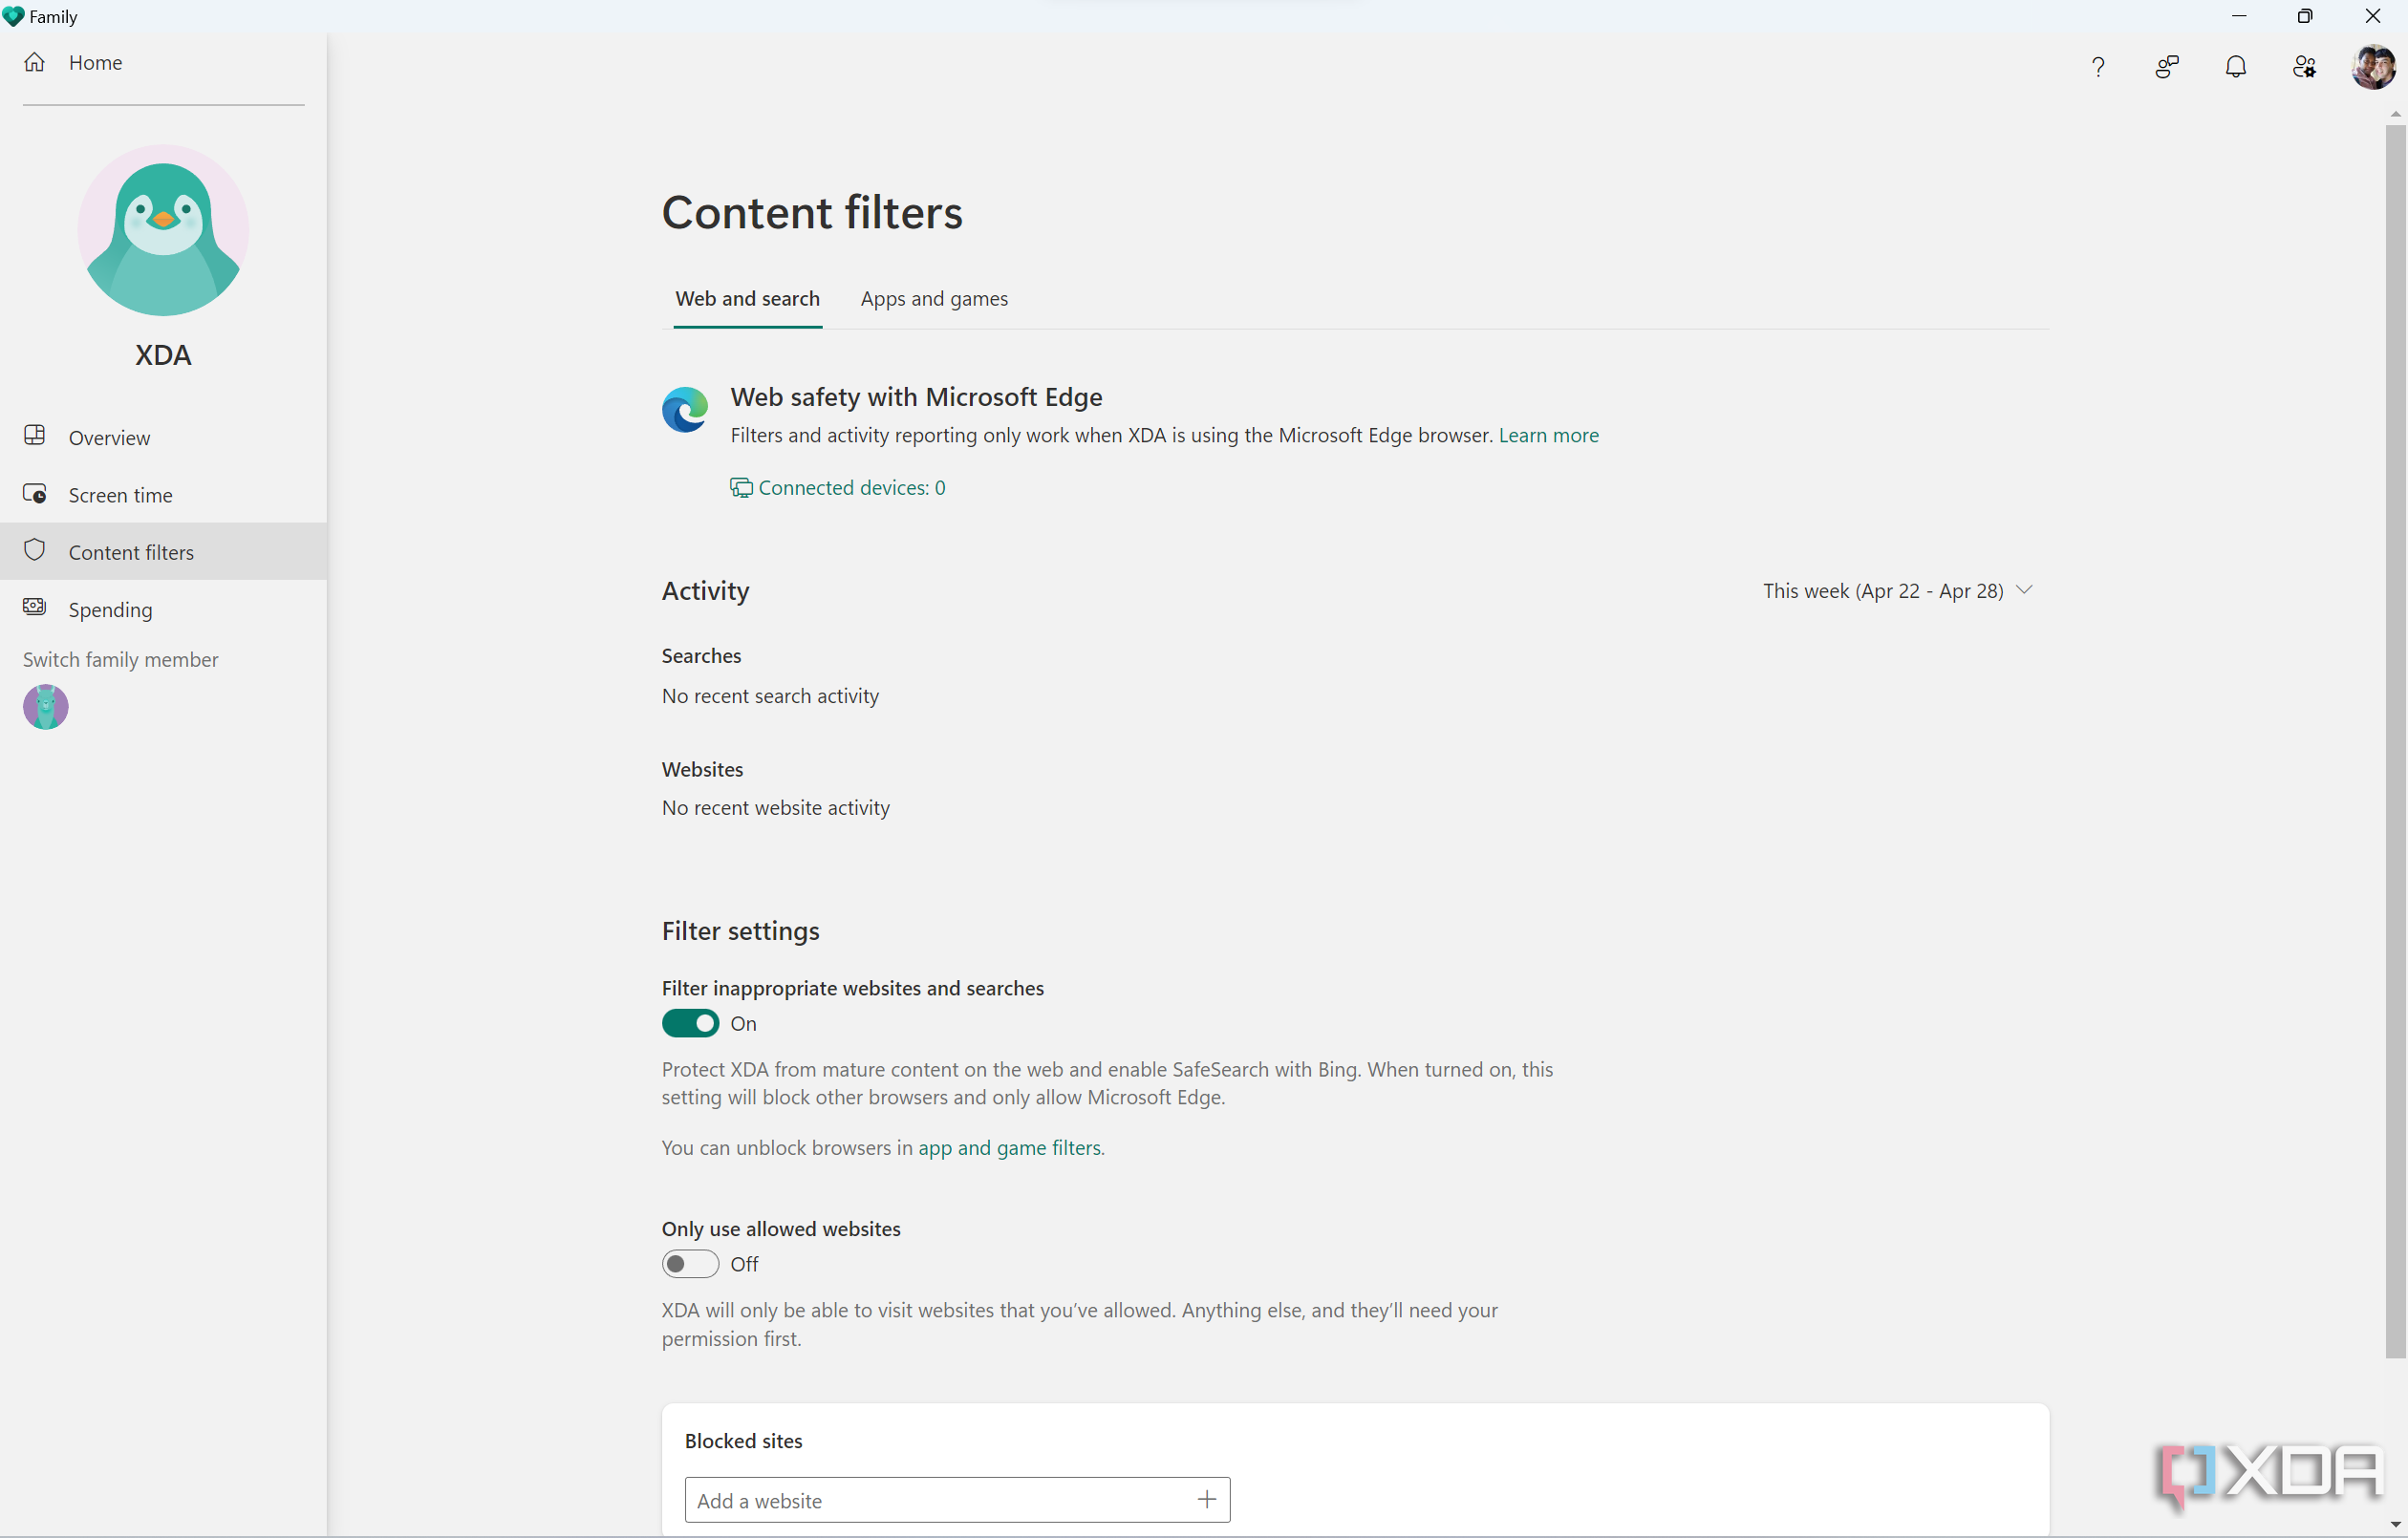 Screenshot of web and search content filters page in Microsoft Family app